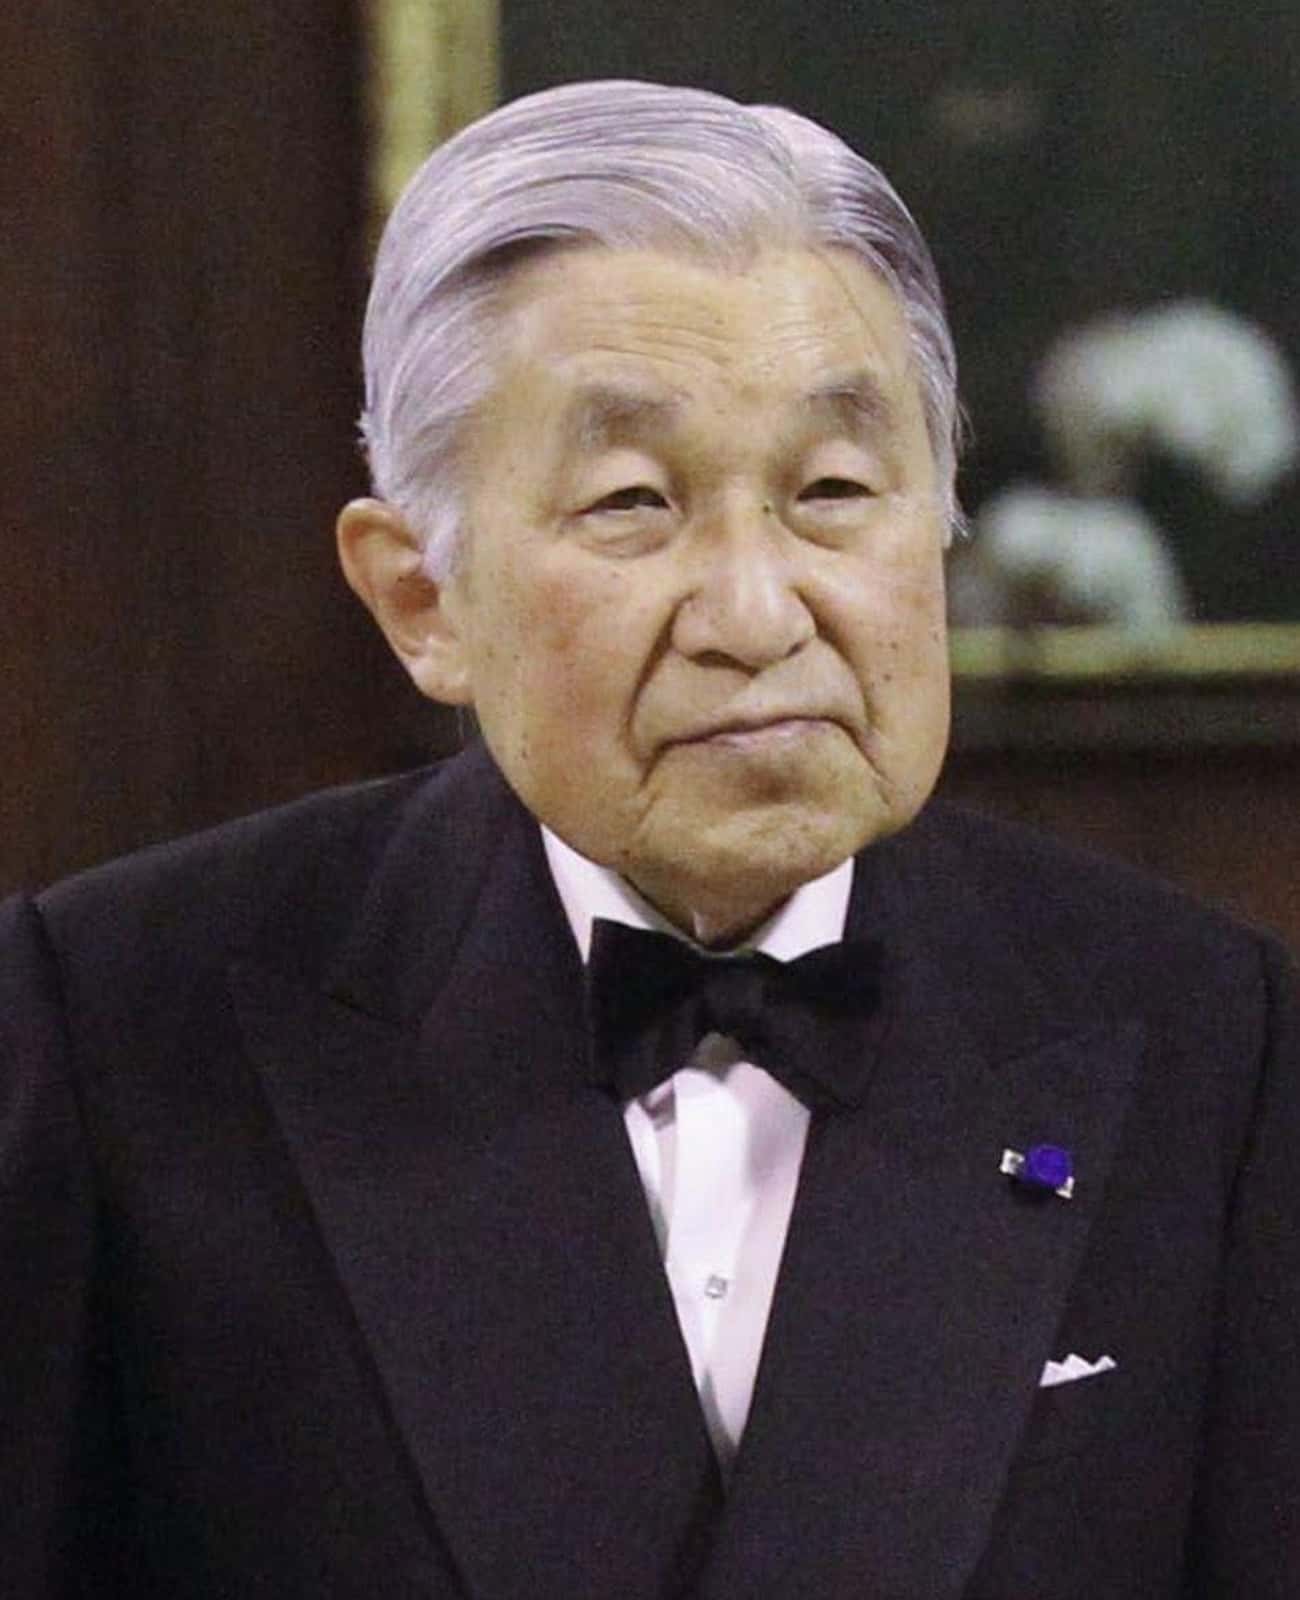 Japanese Emperor Akihito Abdicated, Citing Old Age